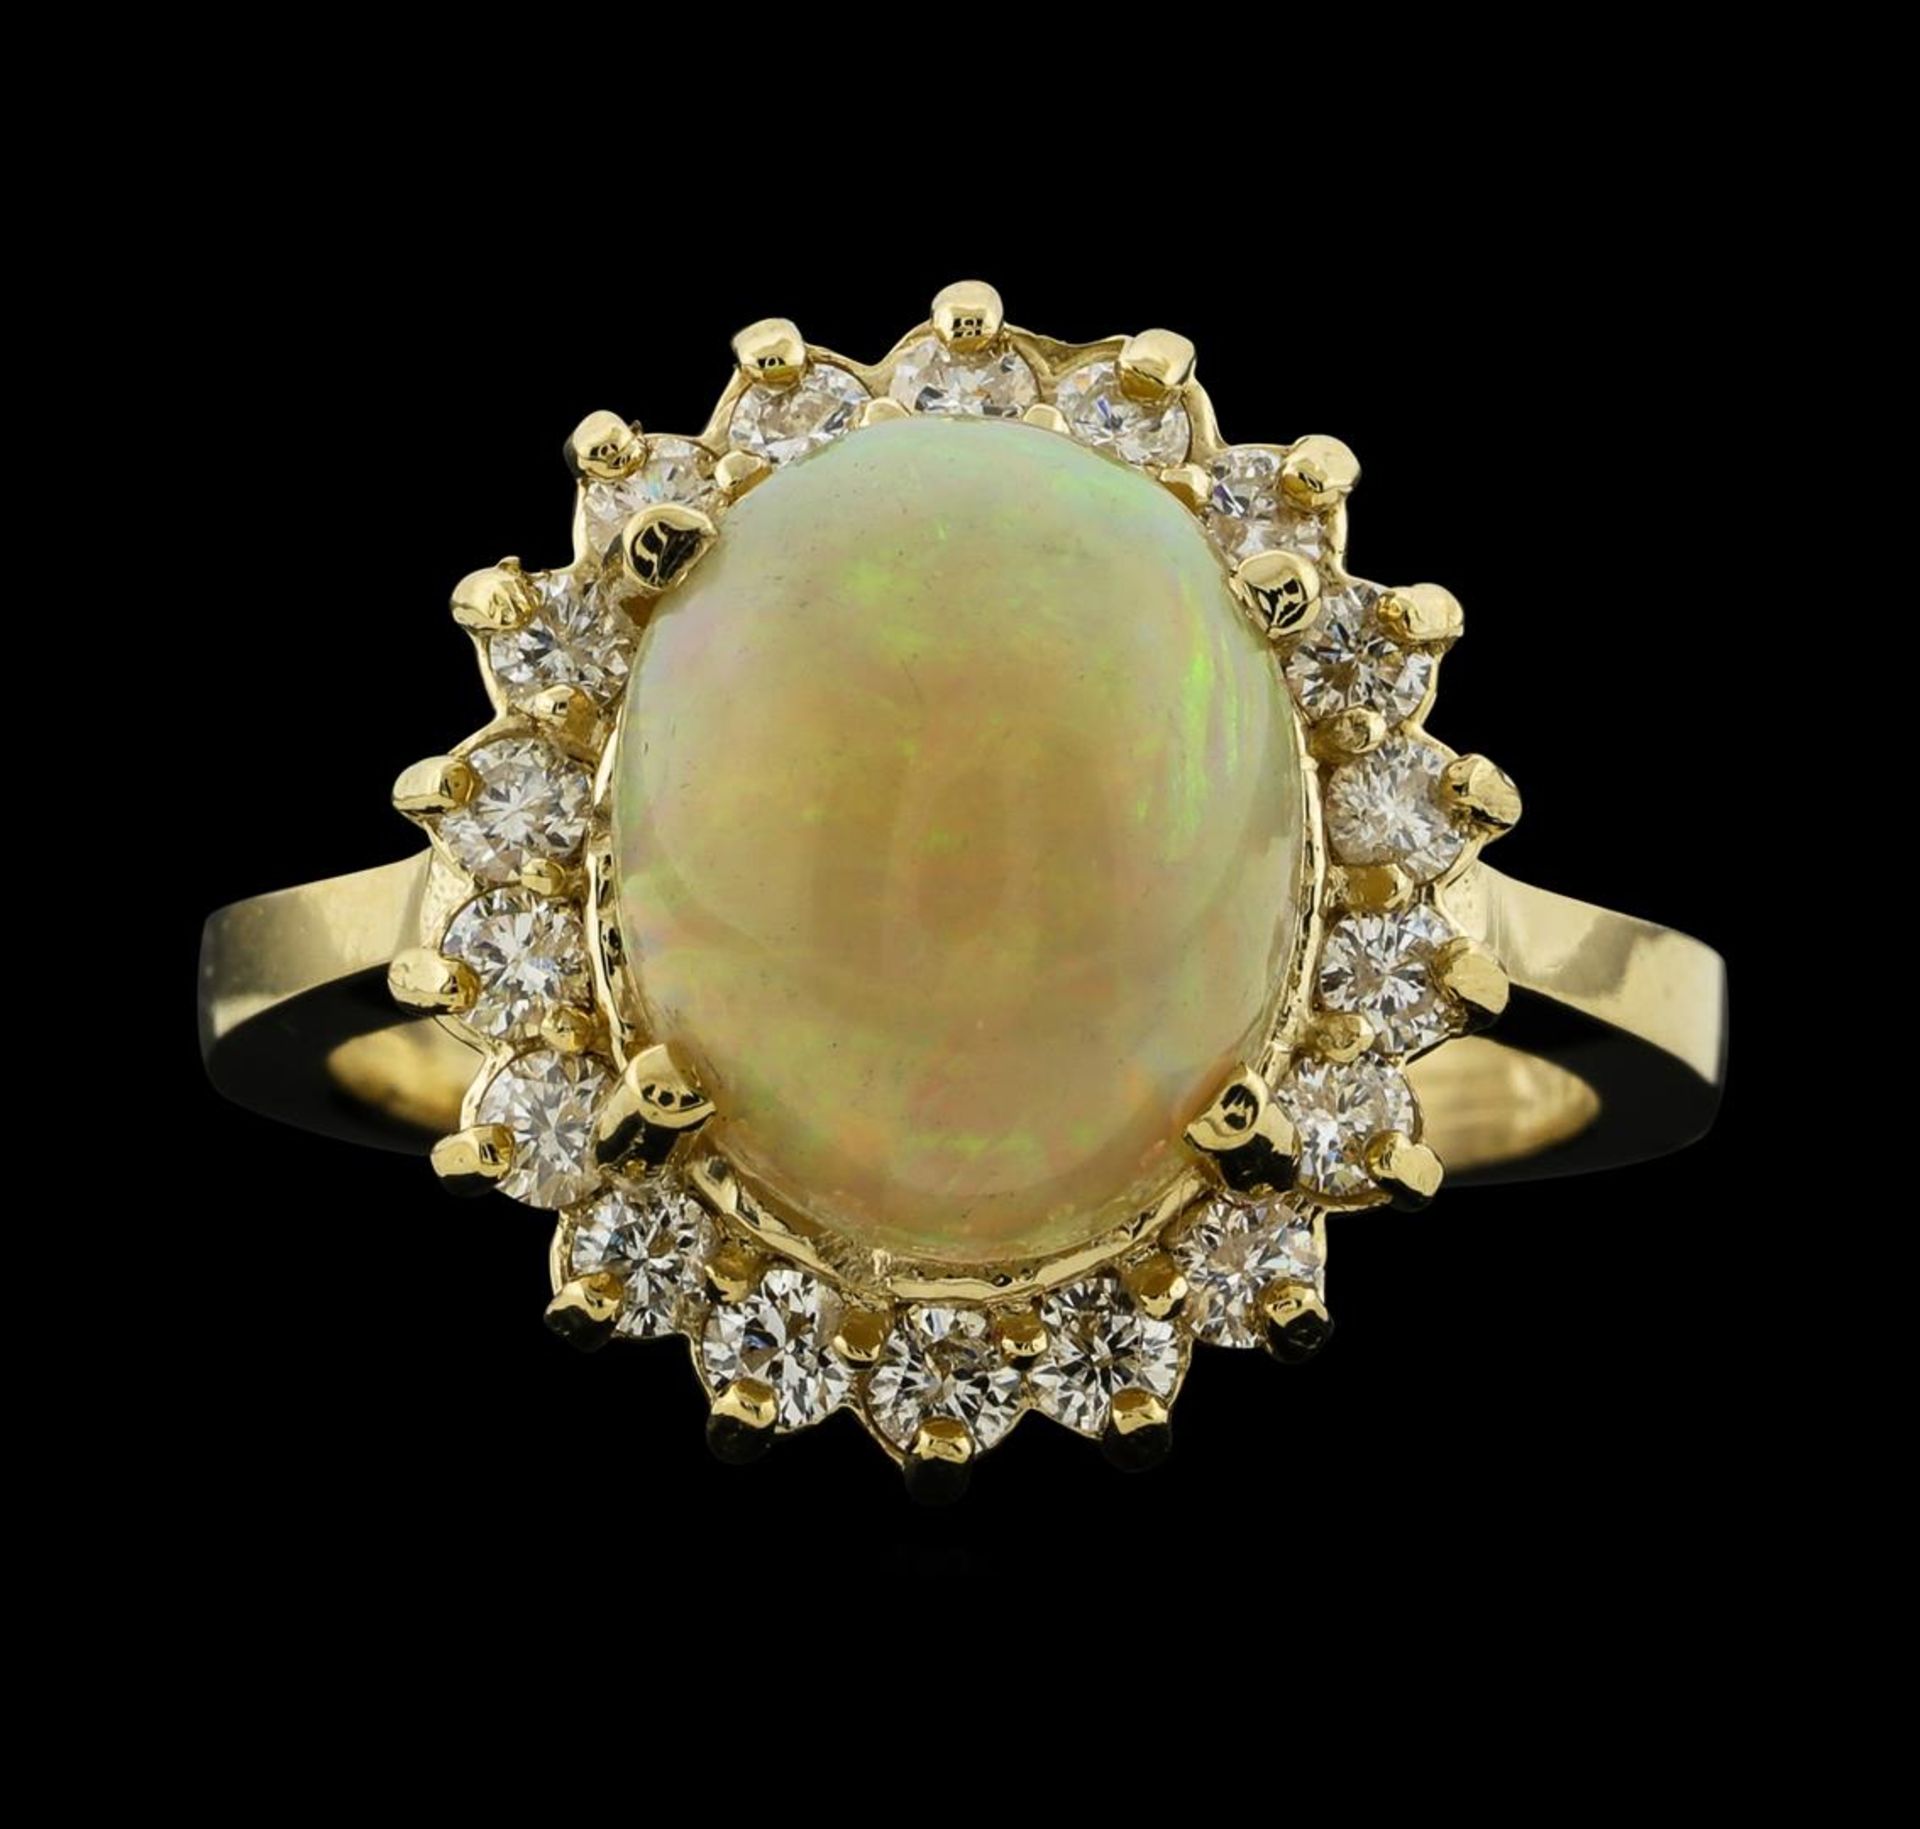 2.82 ctw Opal and Diamond Ring - 14KT Yellow Gold - Image 2 of 4